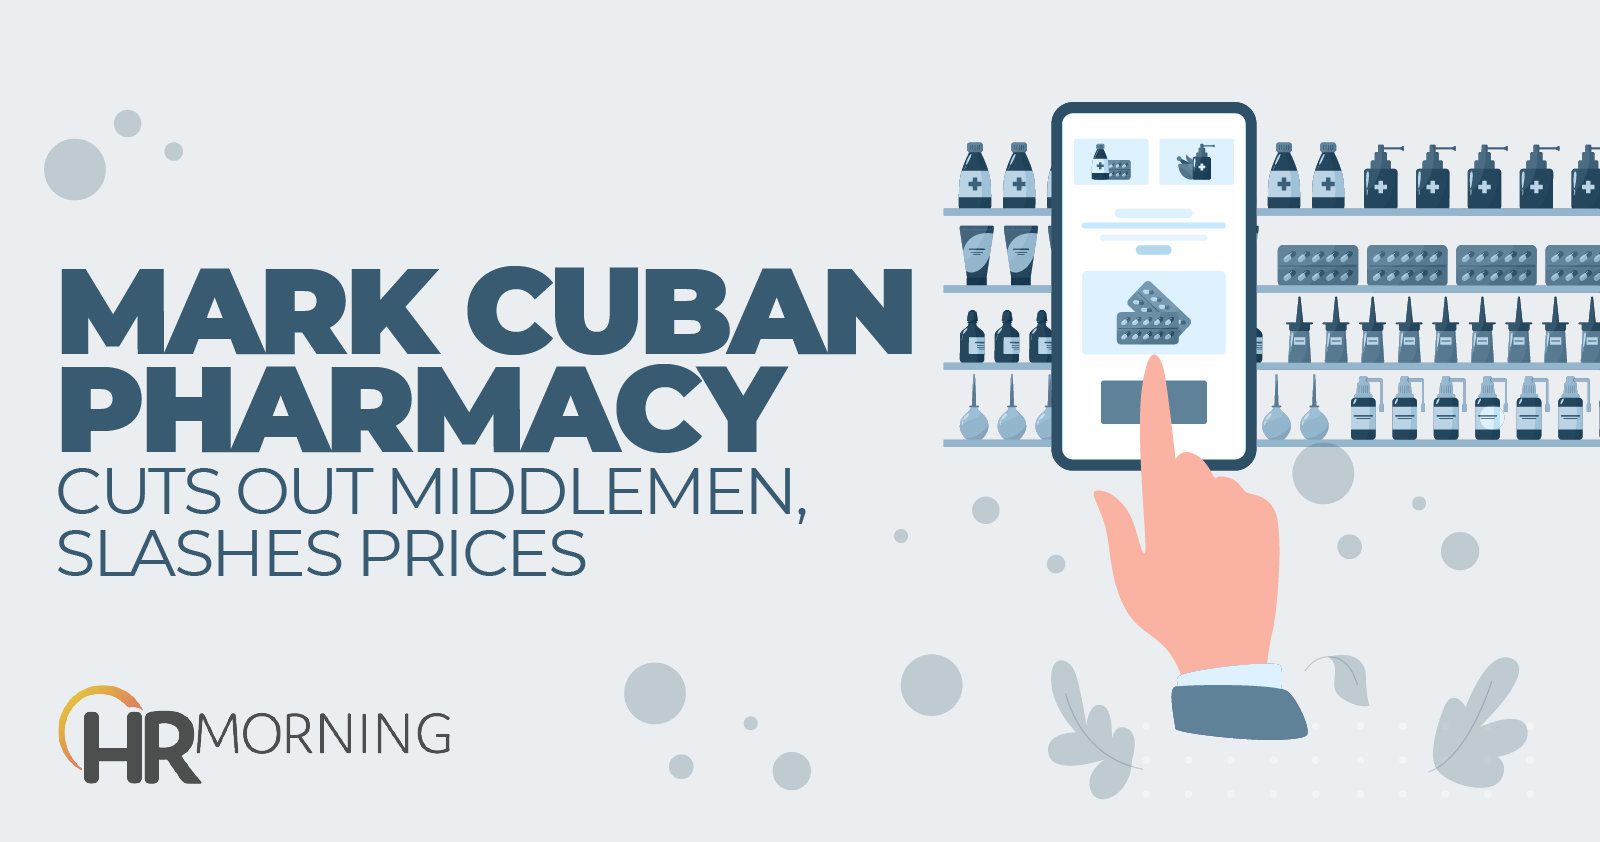 Mark Cuban pharmacy cuts out middlemen slashes prices